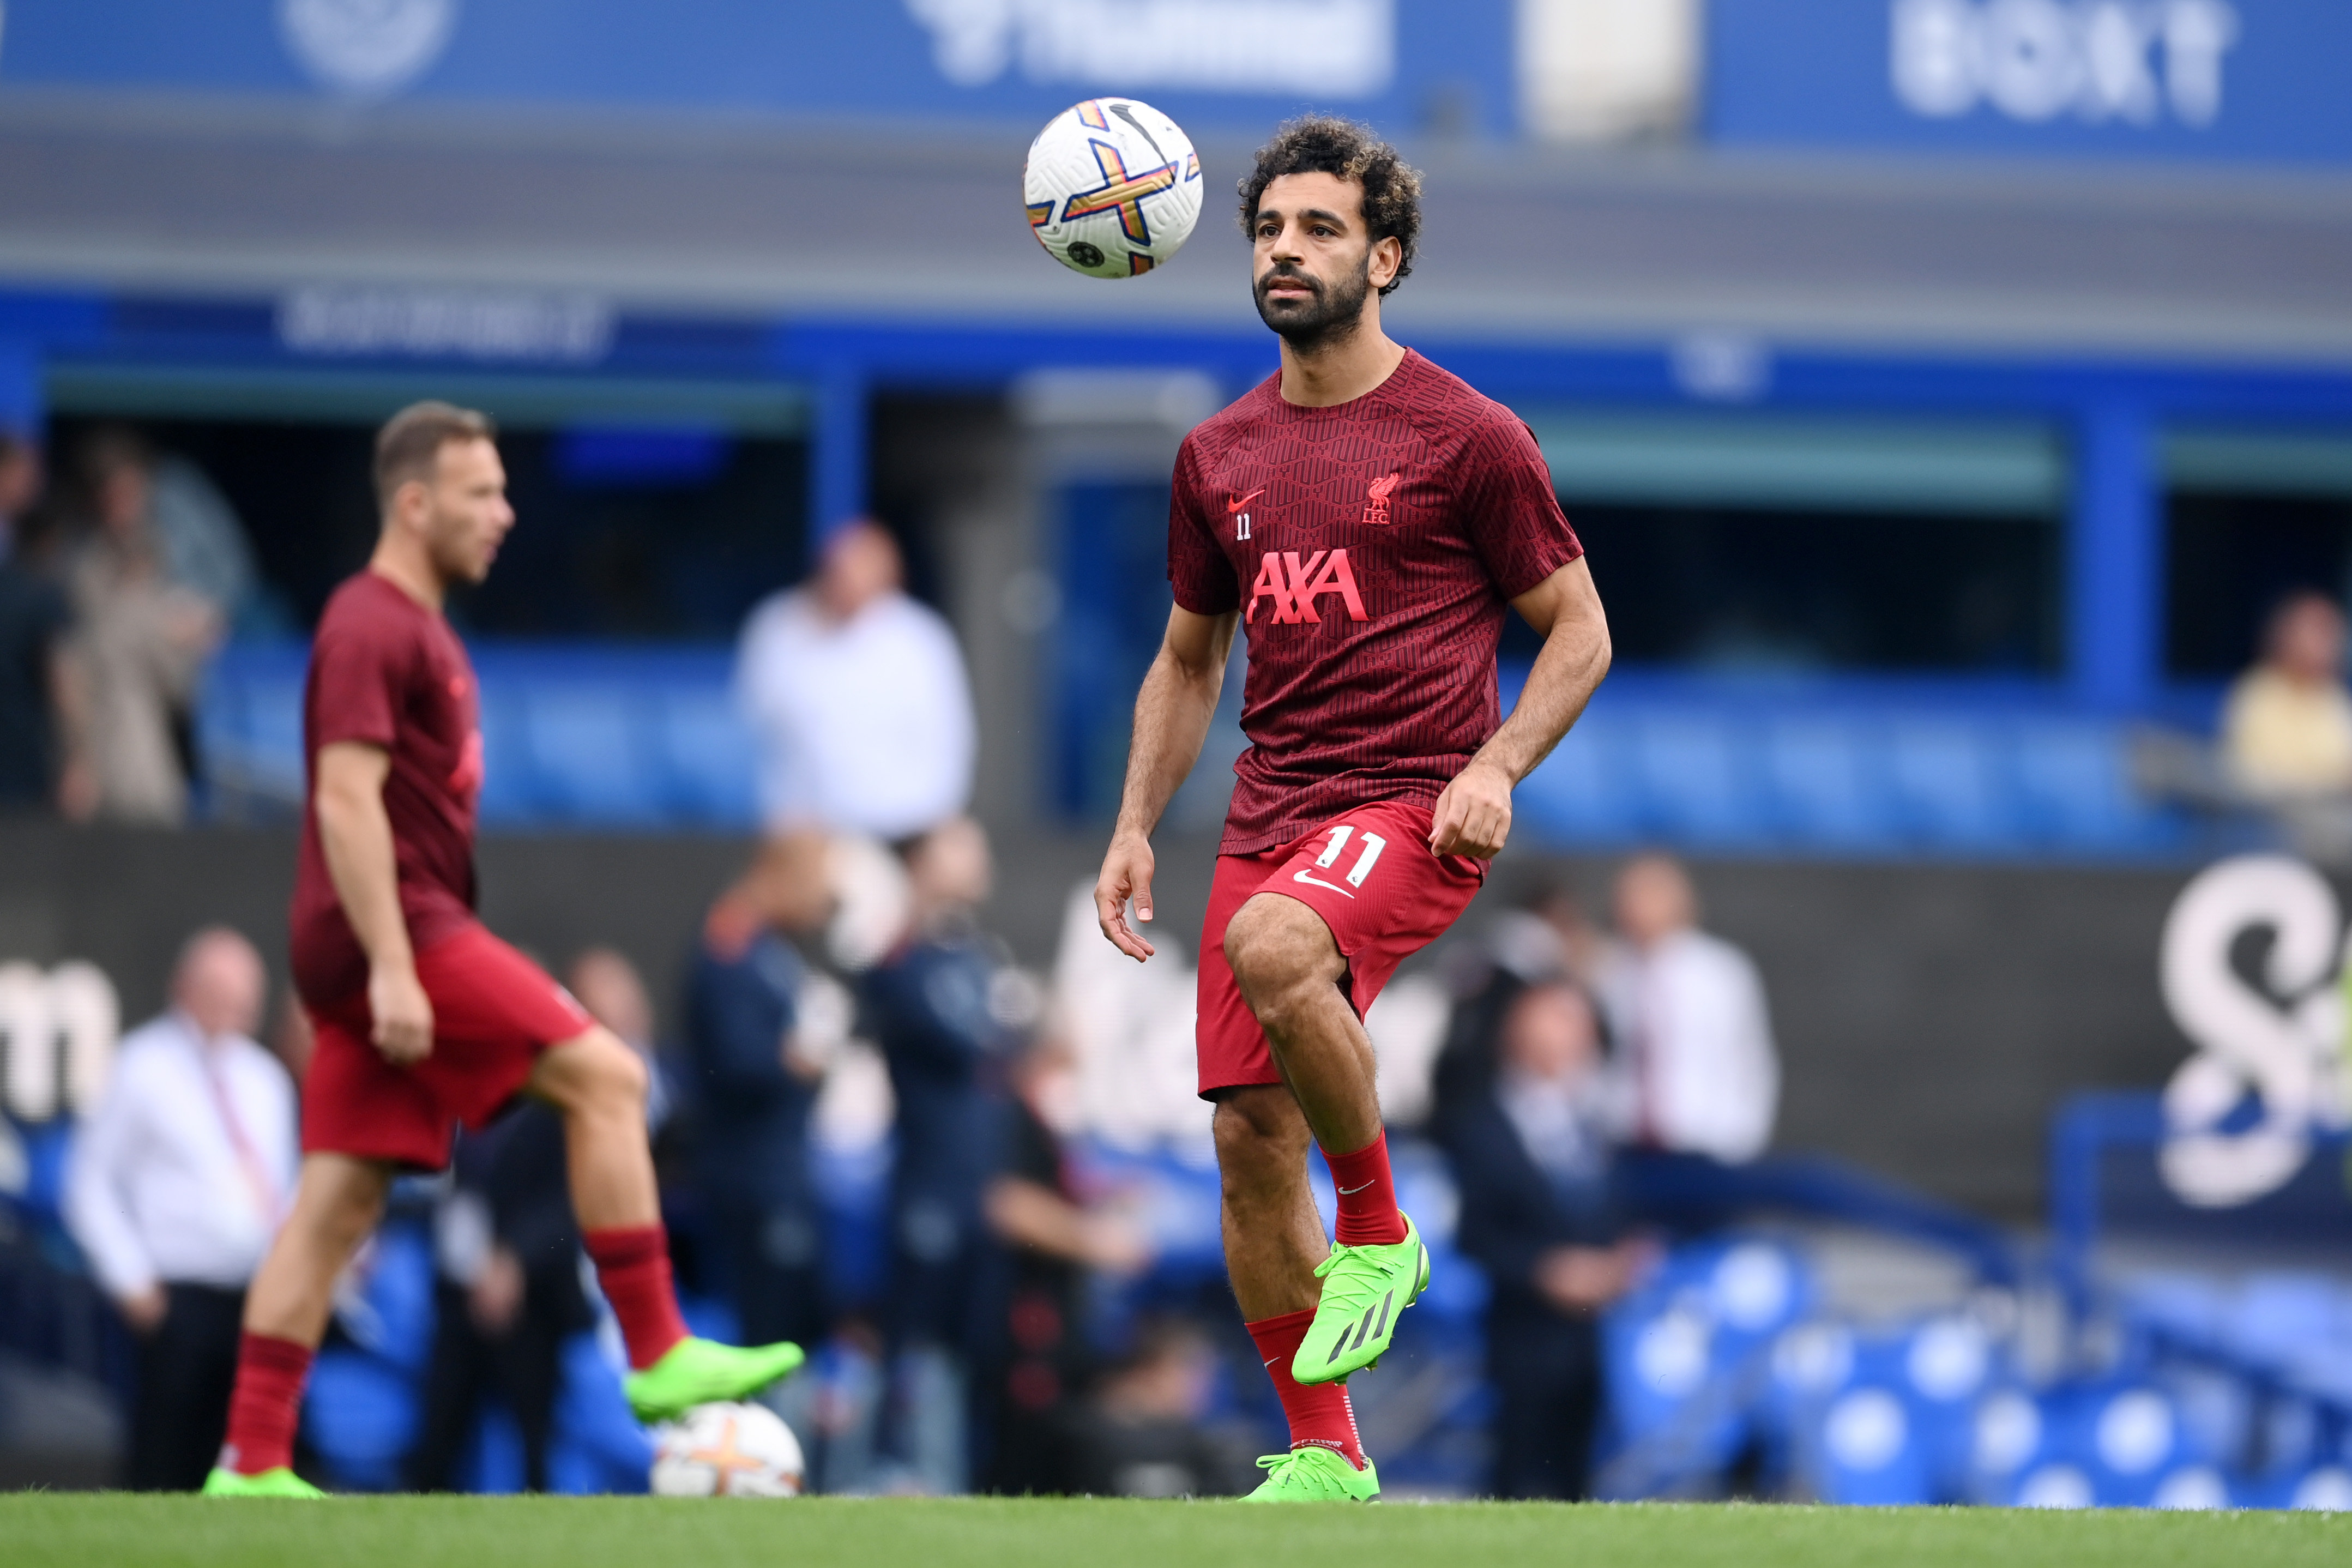 Everton player fires tongue-in-cheek reply to Mo Salah’s latest social media post